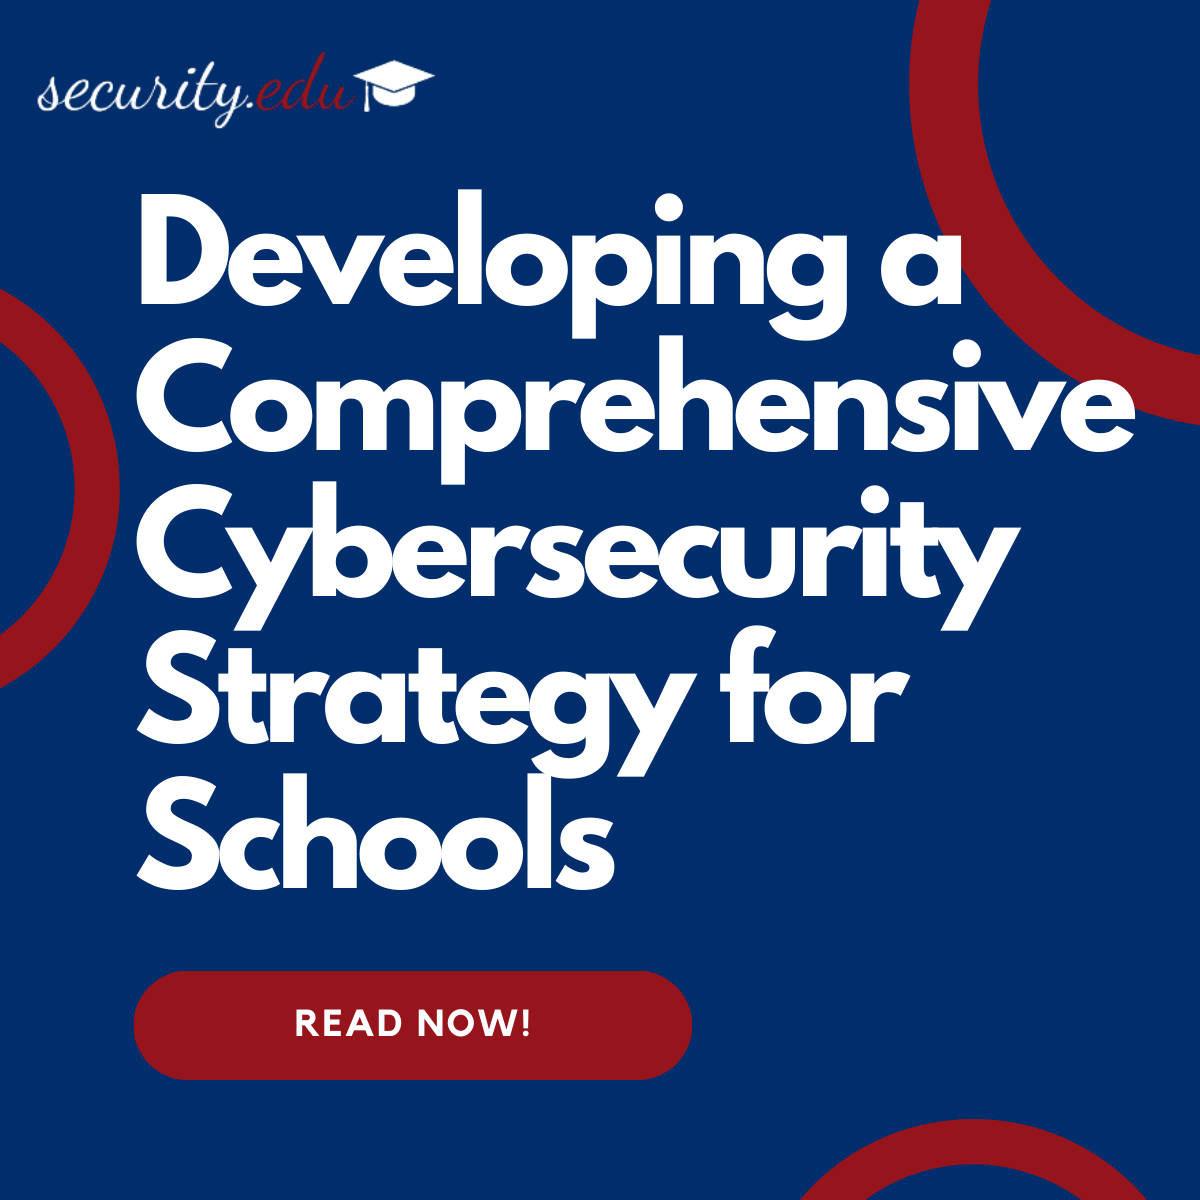 Featured image for “Developing a Comprehensive Cybersecurity Strategy for Schools”